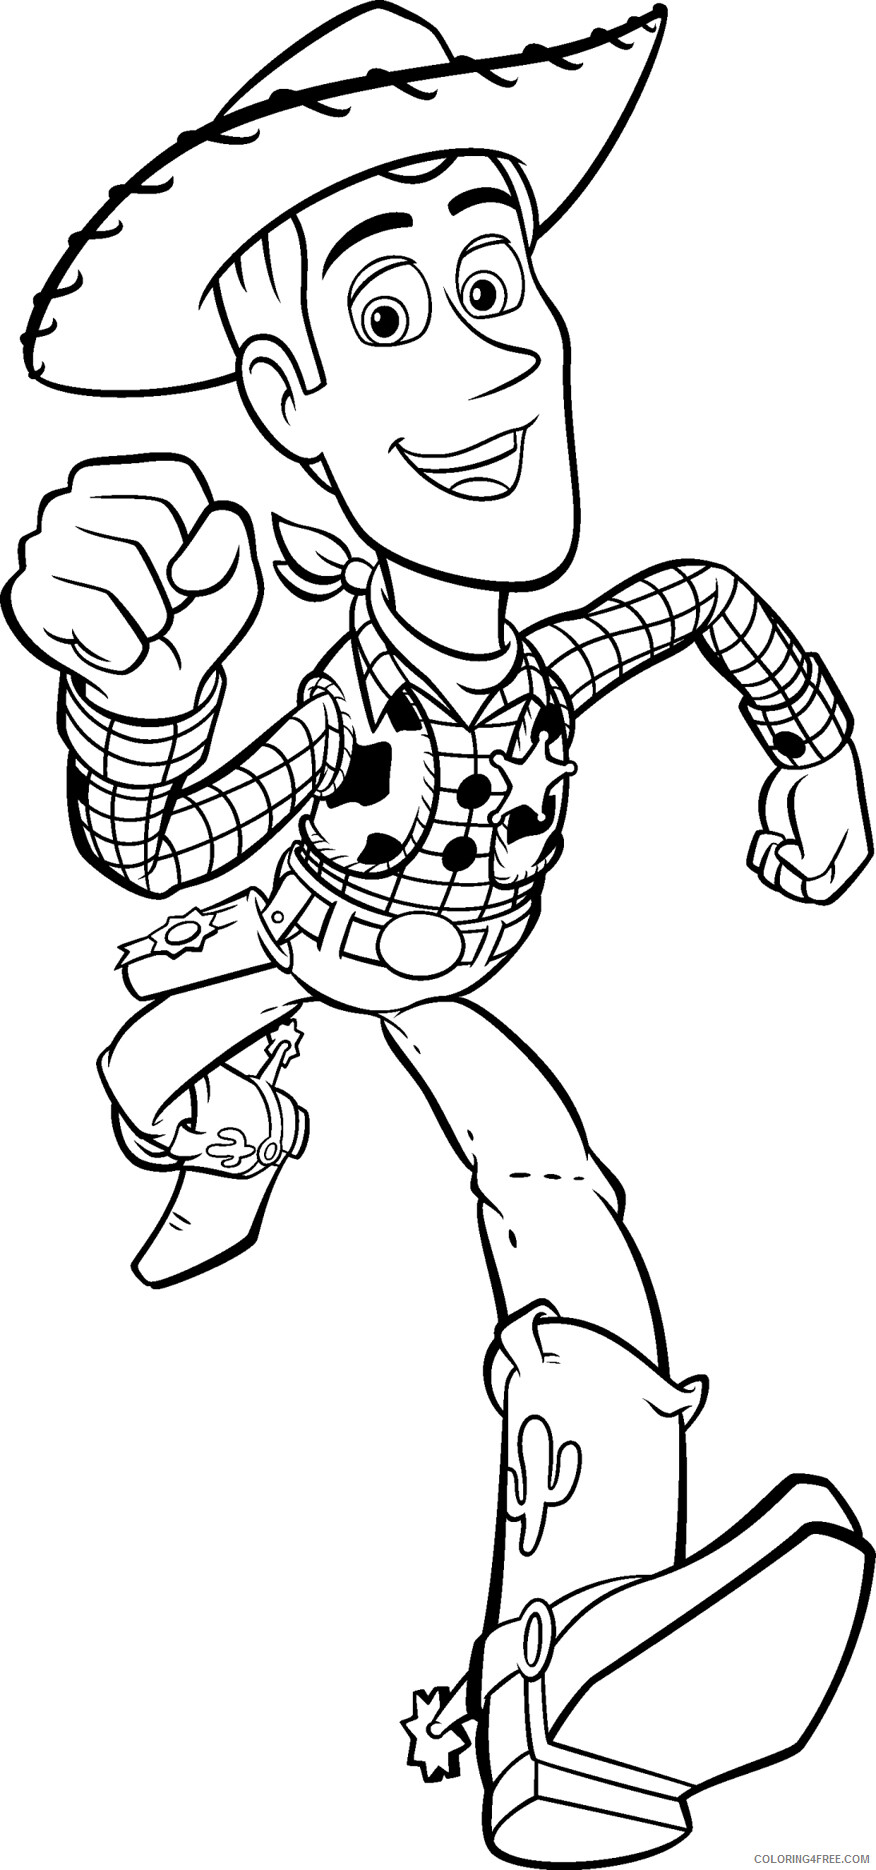 Toy Story Coloring Pages TV Film Toy Story Woody Printable 2020 10530 Coloring4free